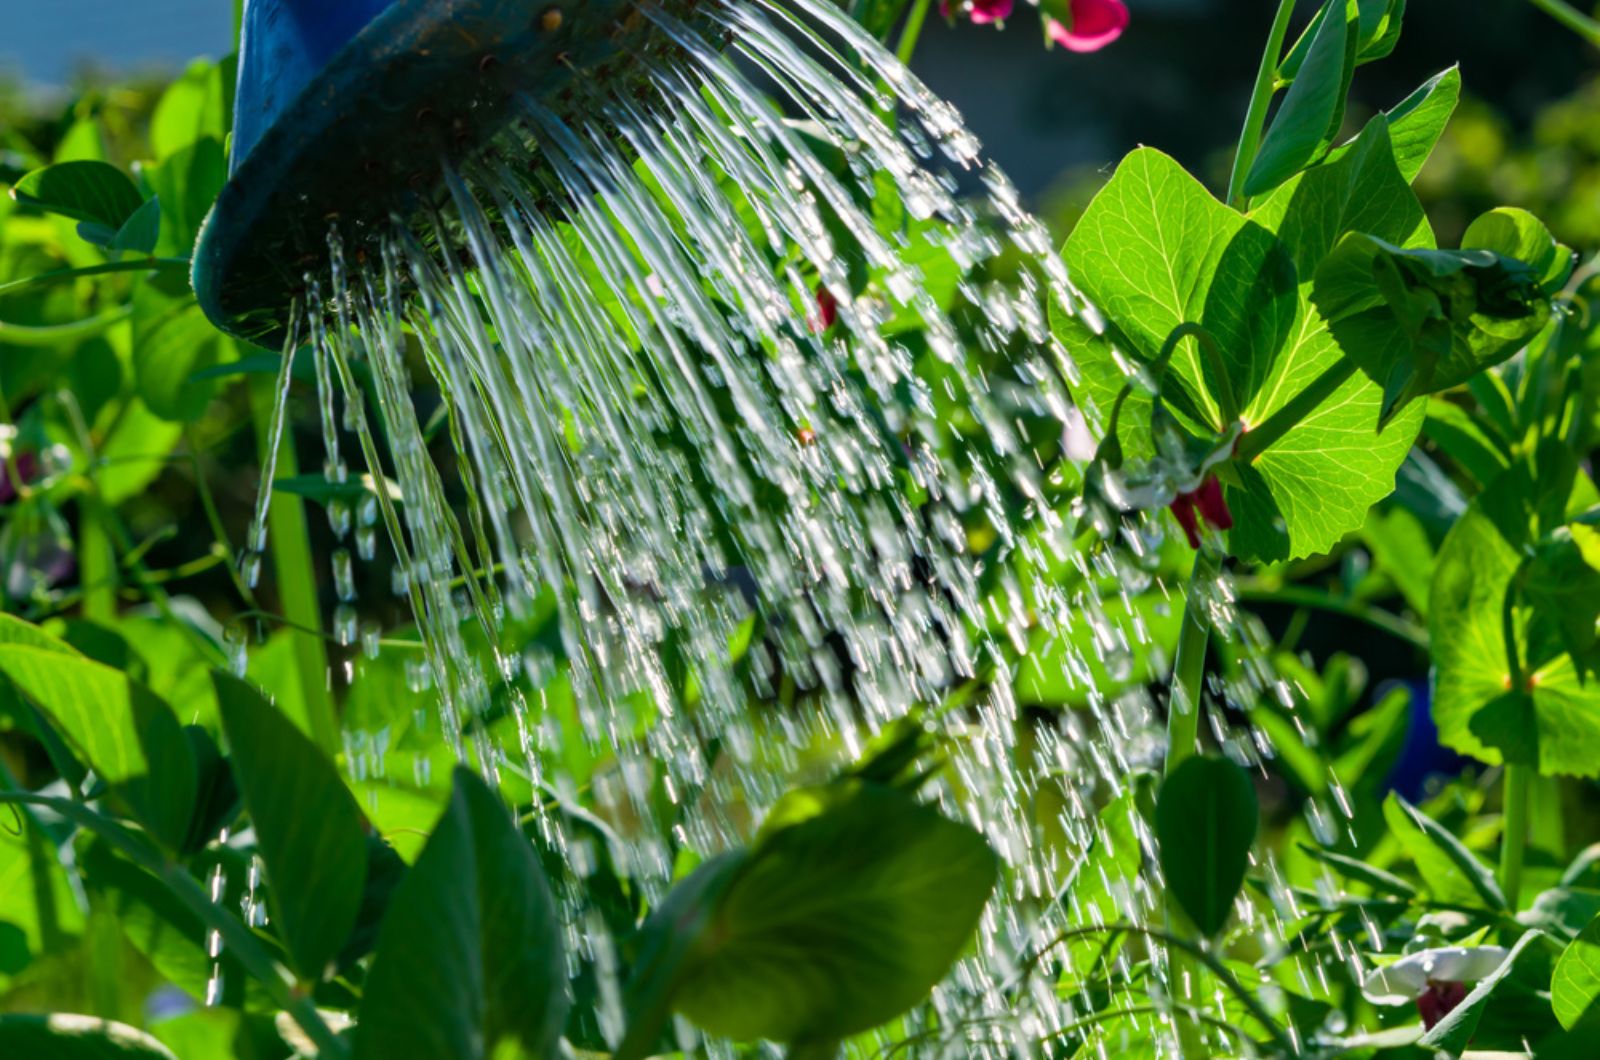 Watering water from a watering can of blooming sweet peas in the garden